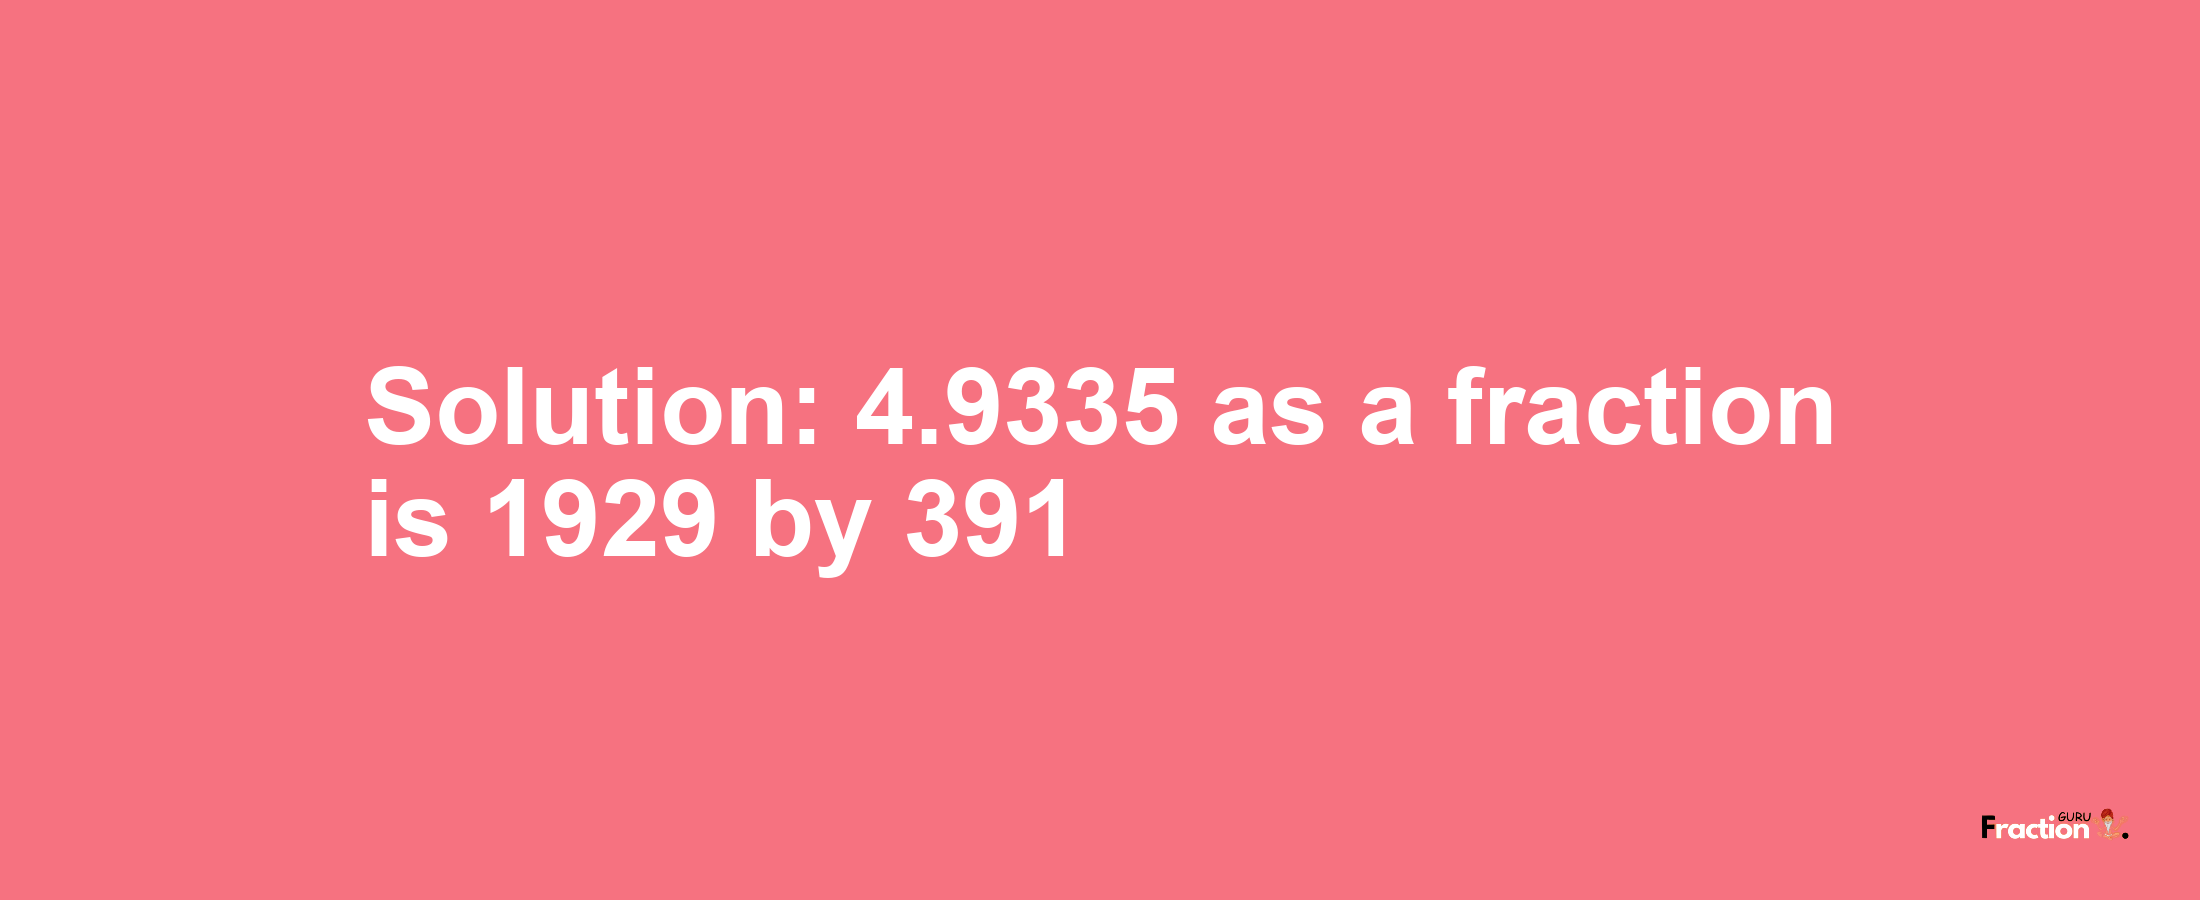 Solution:4.9335 as a fraction is 1929/391